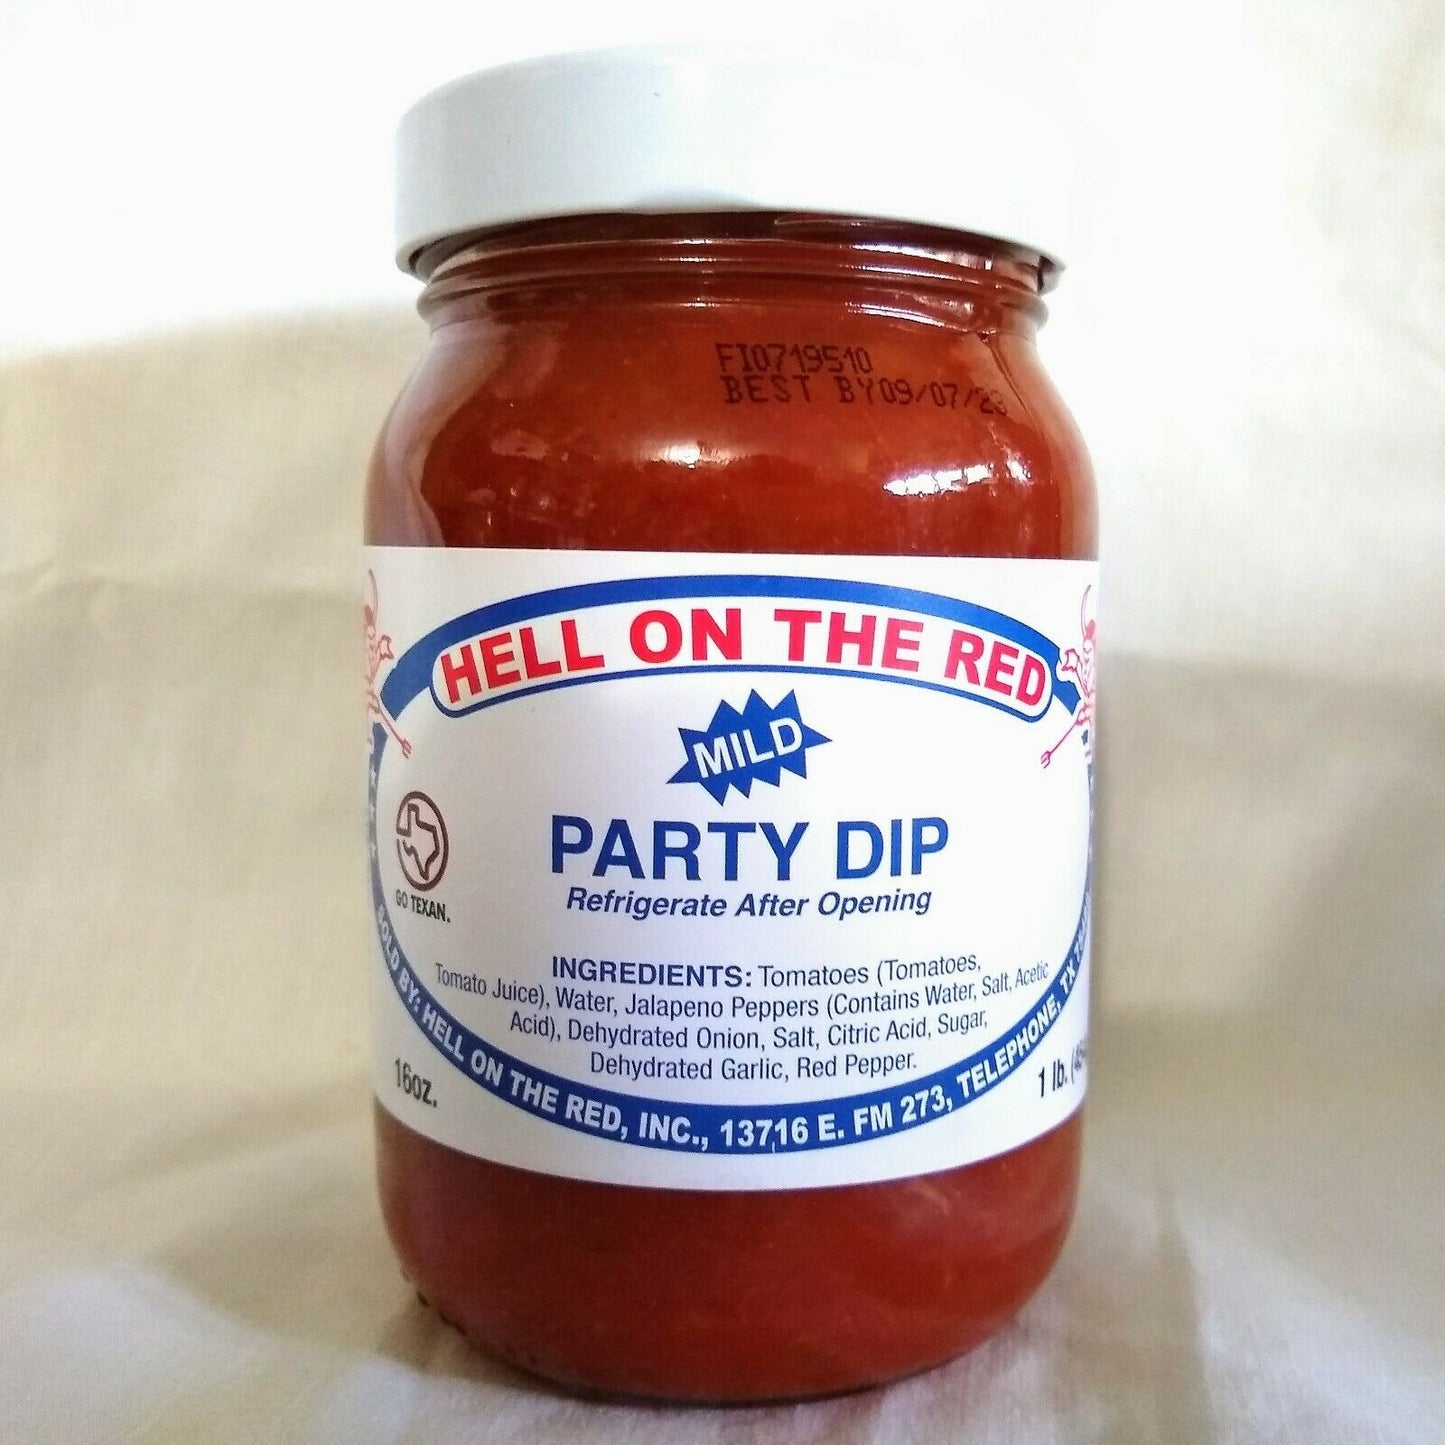 Hell On The Red Mild Party Dip Salsa 16 Oz Glass Jar